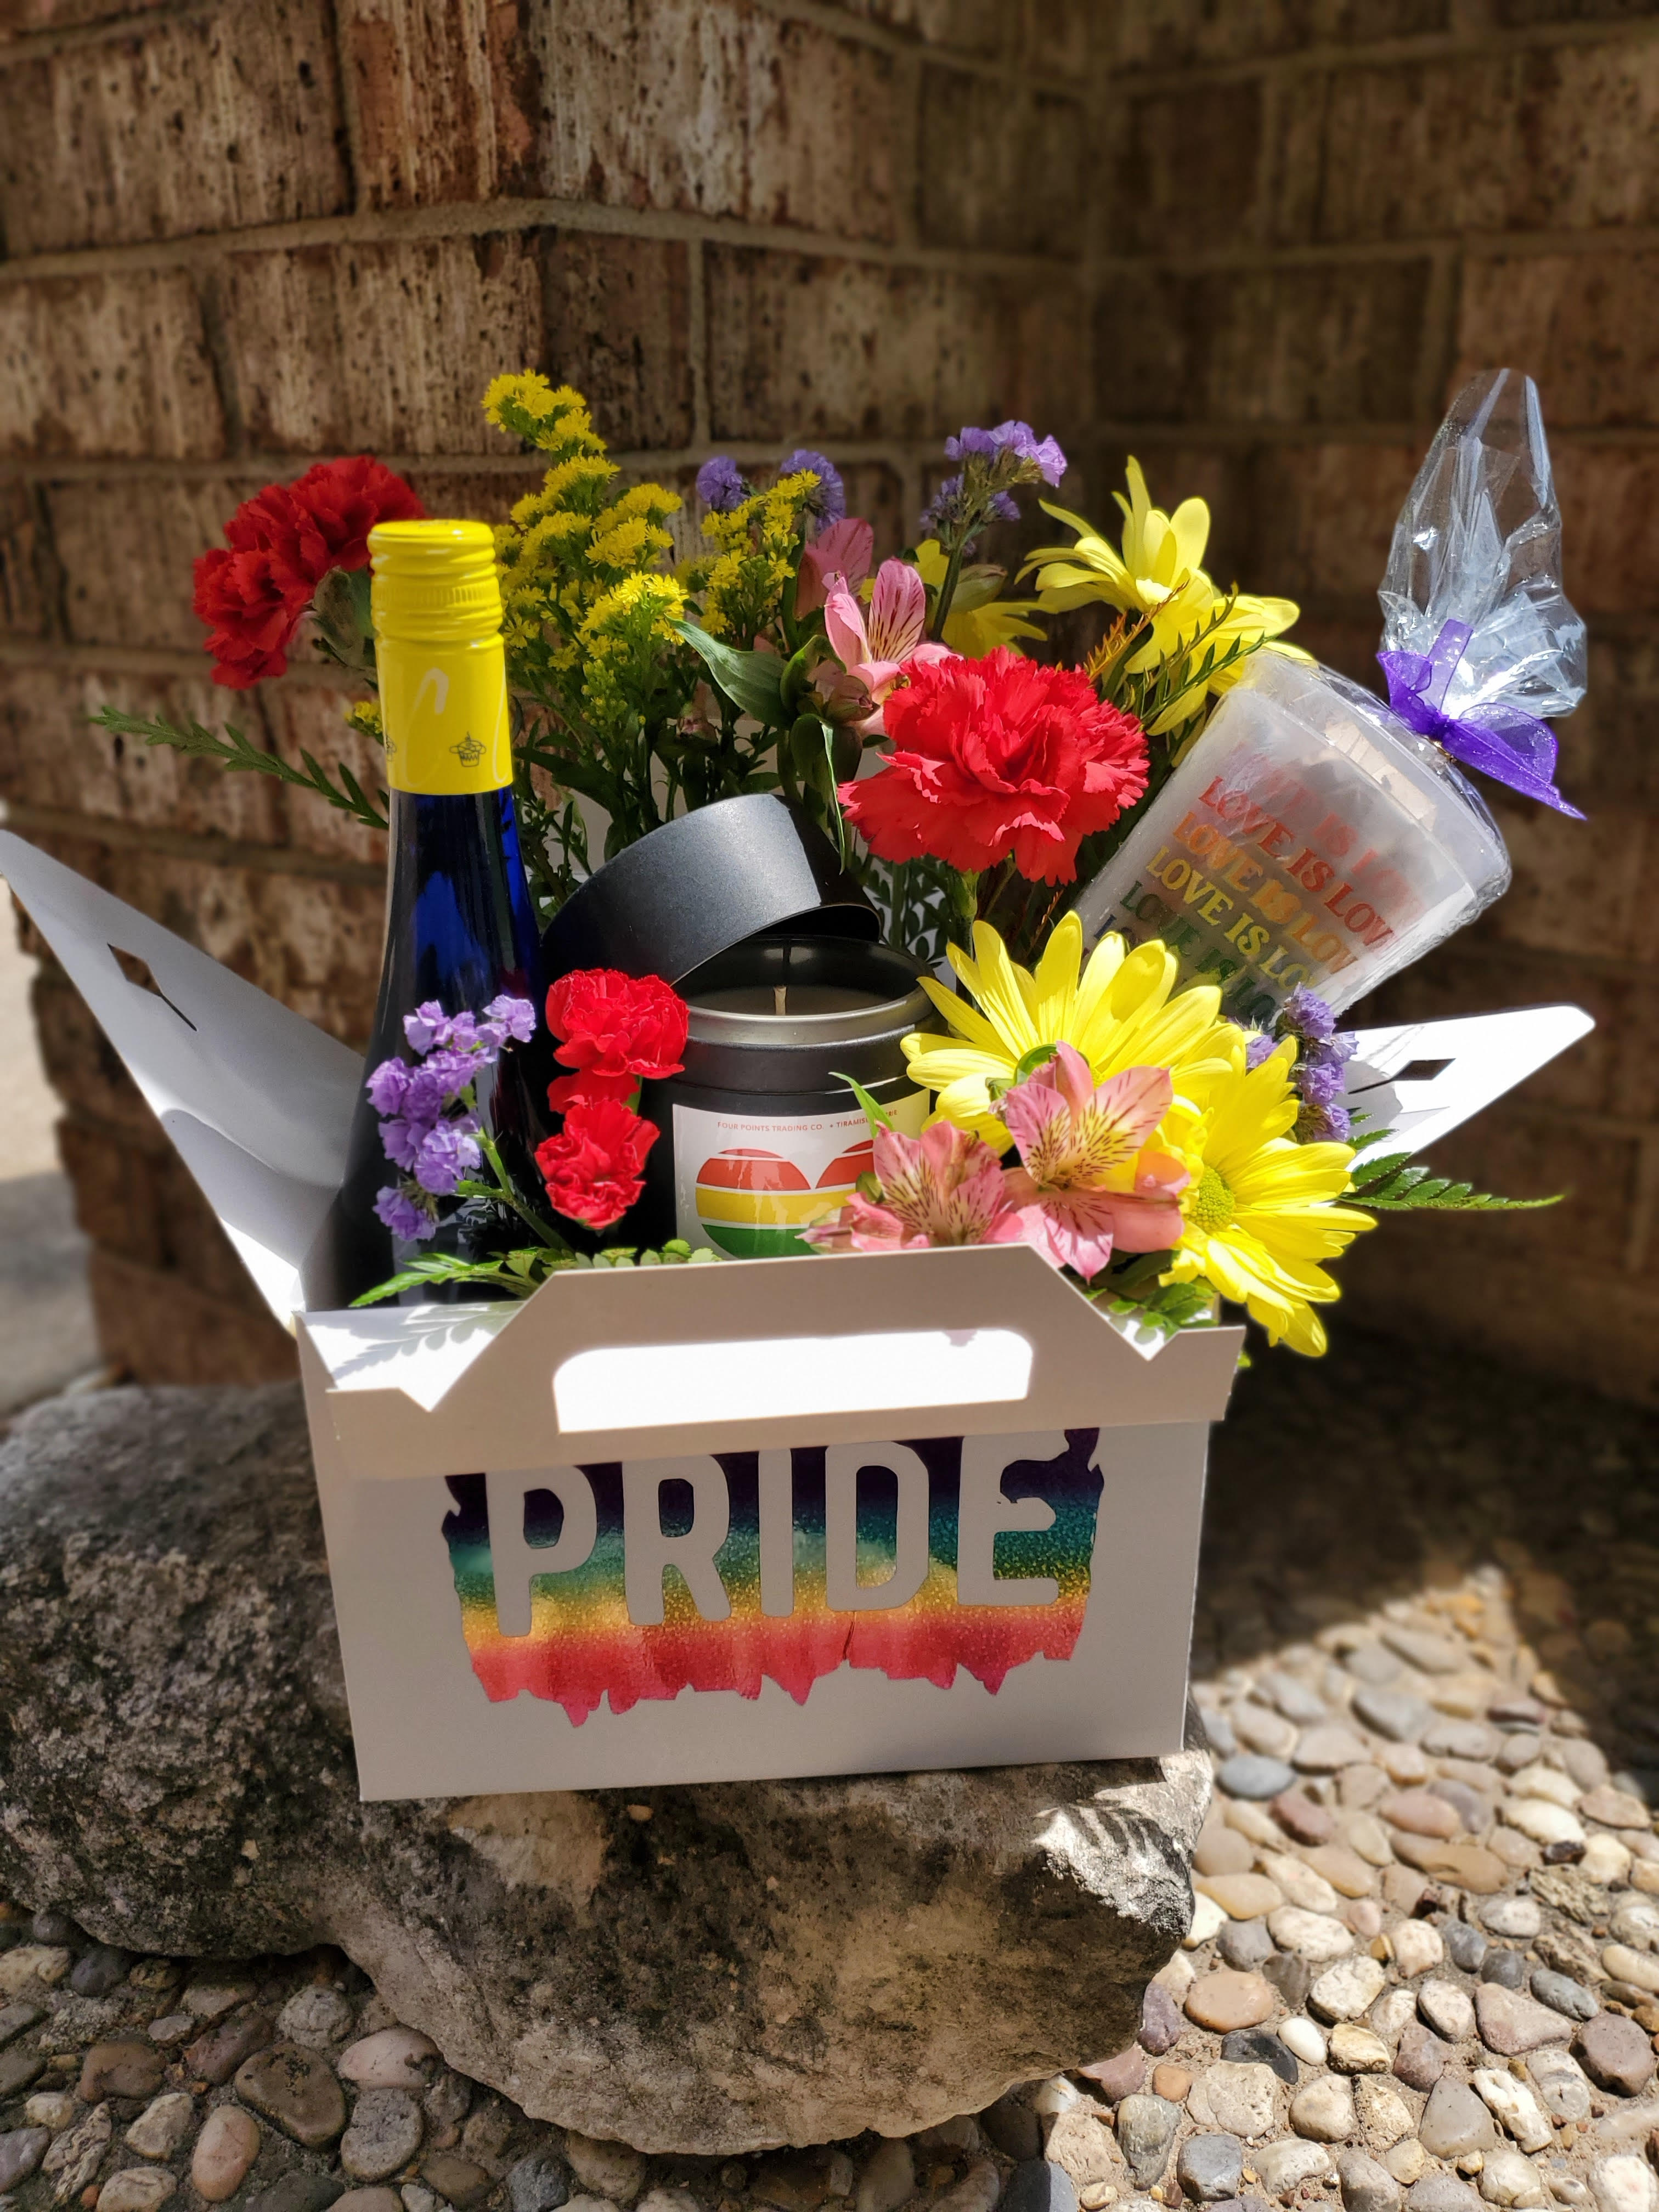 Loud and Proud - Come out with a flourish of Color and Pride! This Pride Box contains Cupcake Riesling, Two &quot;Love is Love&quot; cups to share that wine with an ally, a Fruity Pride Candle and Fresh Blooms. Perfect for Birthdays, Coming out Parties and especially anniversaries with the person you love!  **IMPORTANT INFO: Orders containing alcohol must be purchased by individuals over the age of 21, or of legal drinking age in your area. Delivery MUST be within our serviced area and must be accepted by an individual over 21 with valid ID. Deliveries can not be delivered to areas where consumption is prohibited (business offices, campus dorms, etc.).